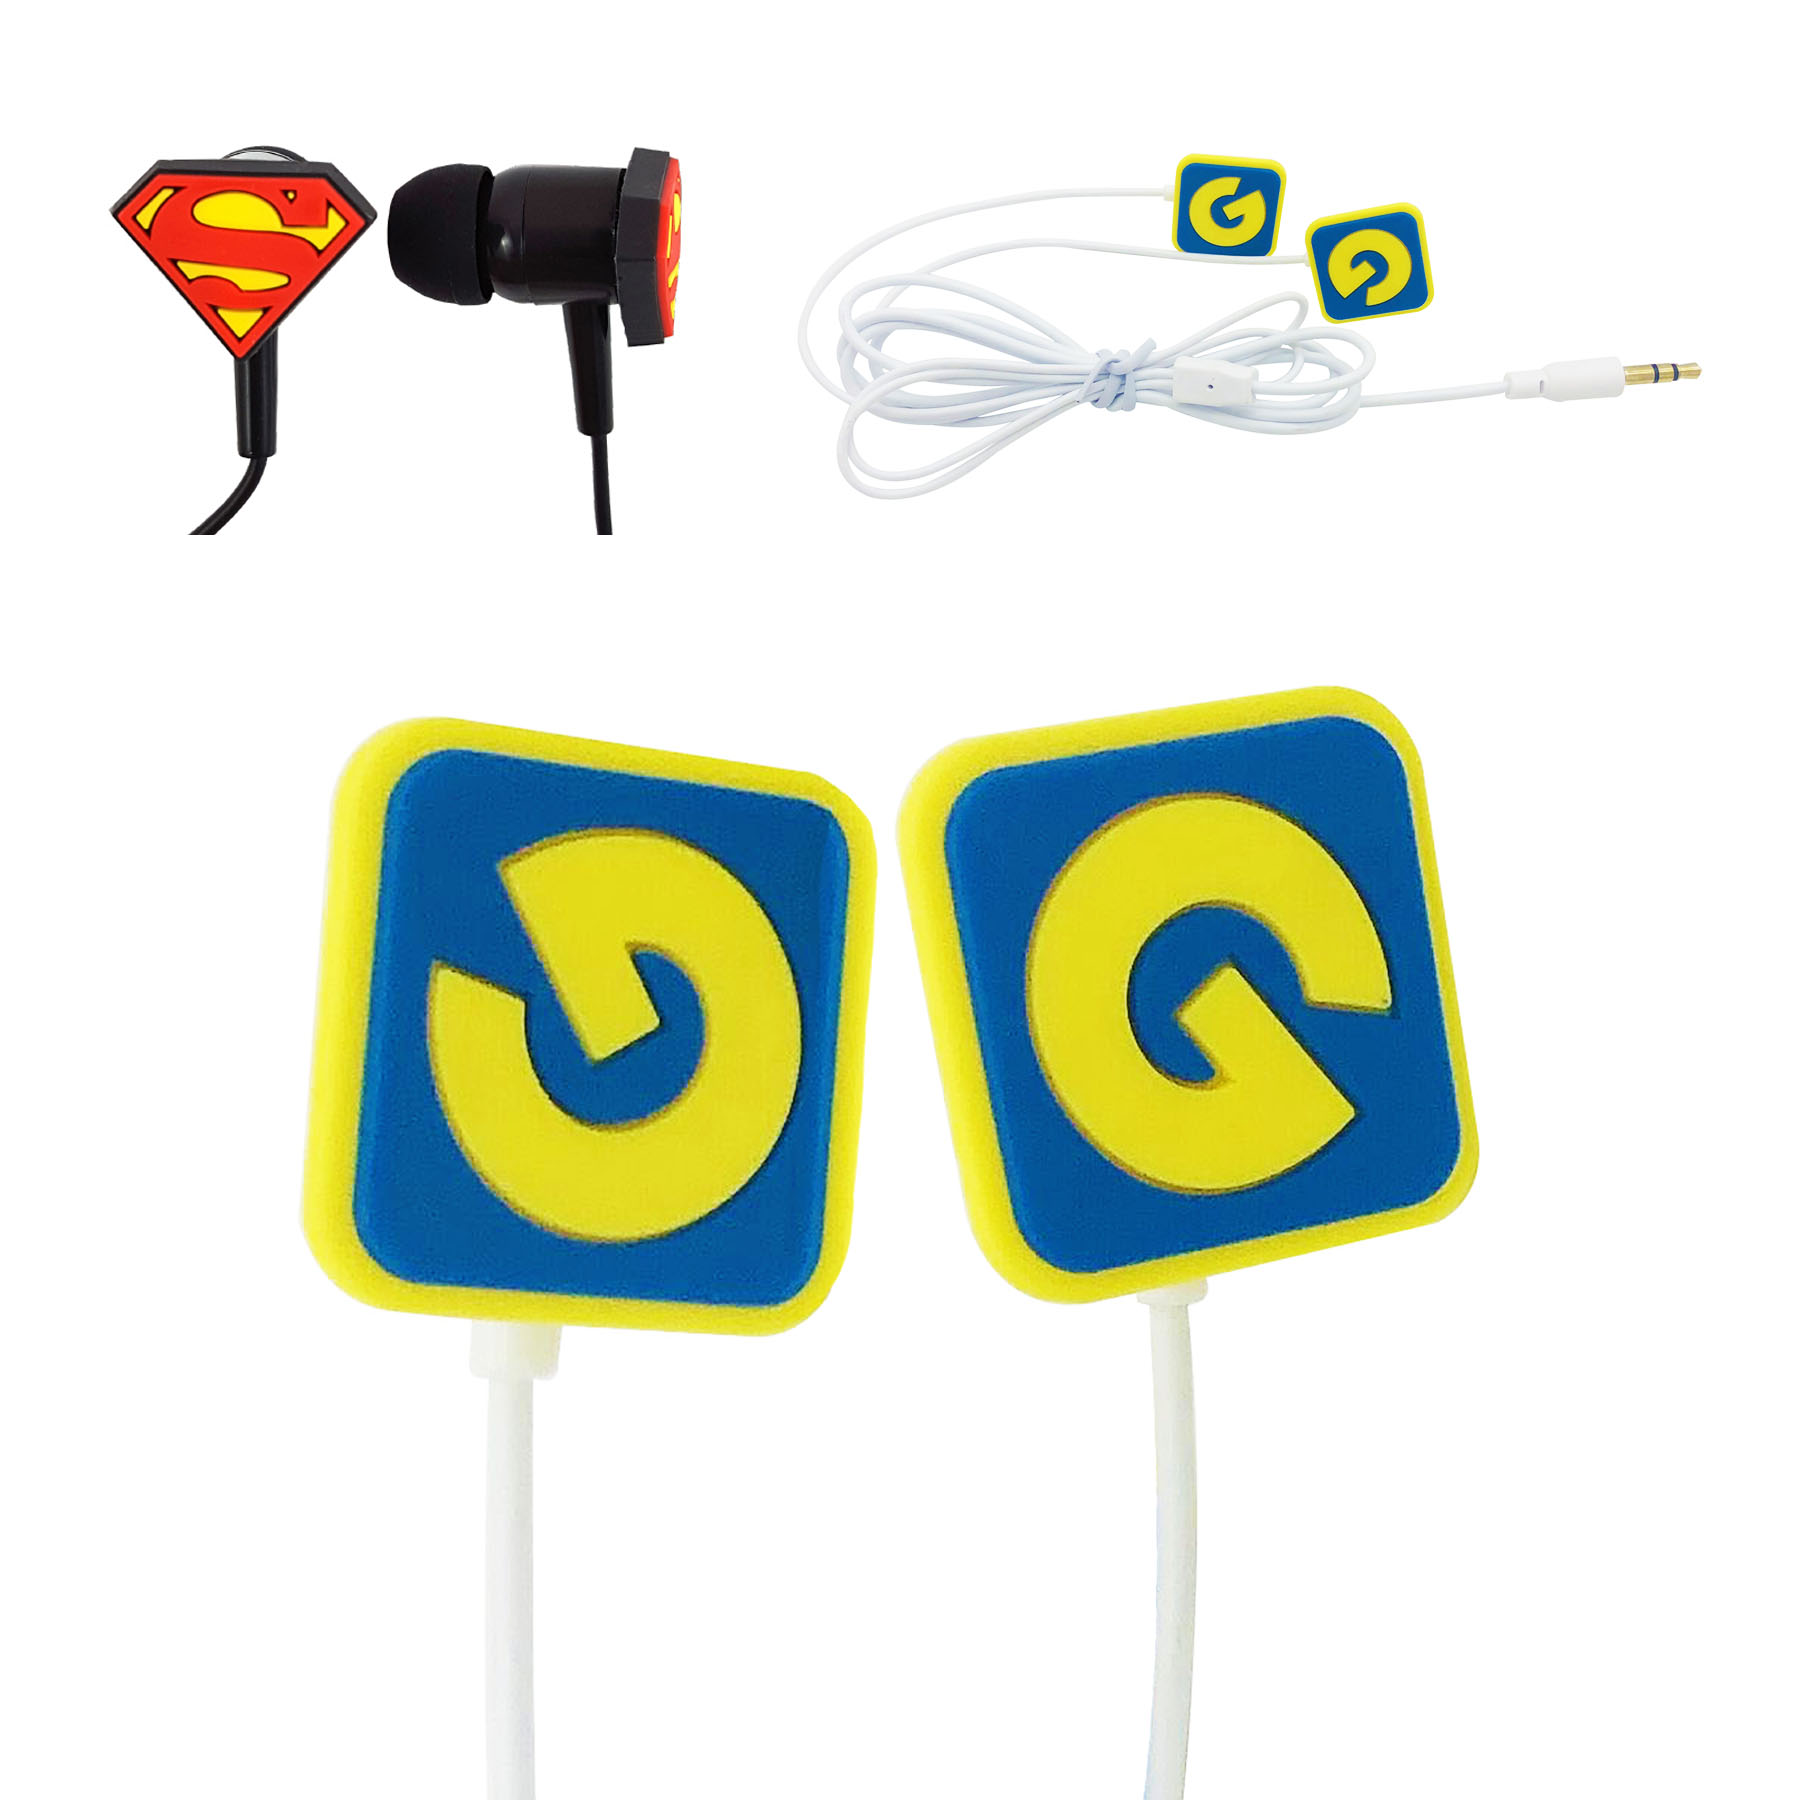 Custom PVC Stereo Earbuds with upgraded speakers